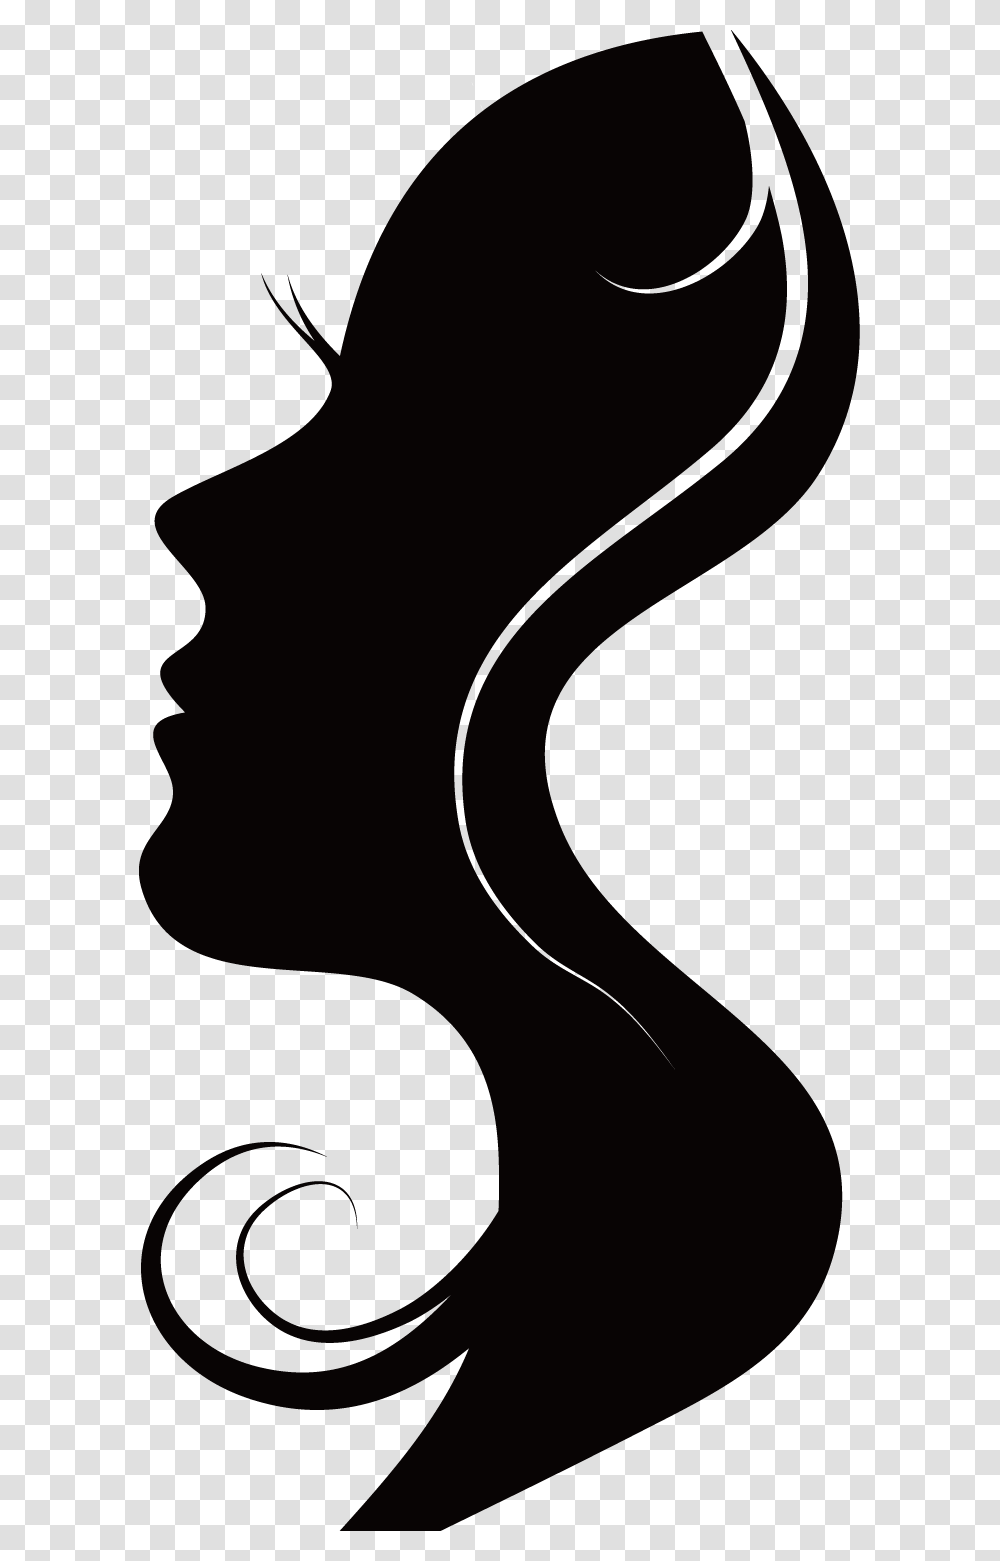 Silhouettes Woman Silhouette Free Frame Clipart Woman Side Face Silhouette Vector, Neck, Footprint, Stencil Transparent Png